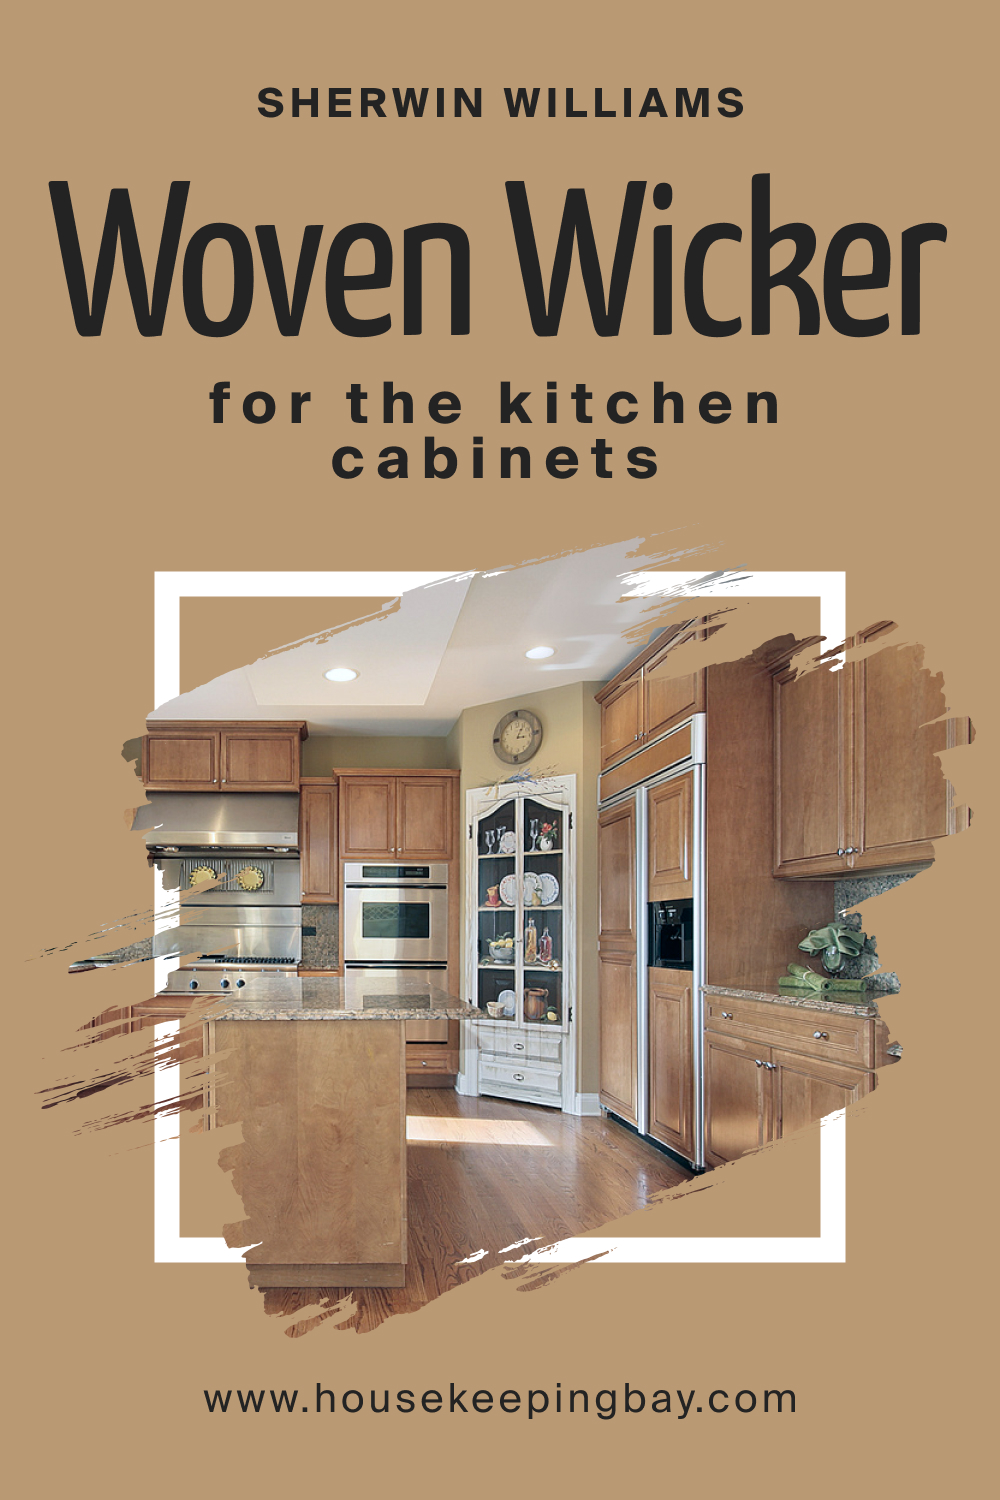 Sherwin Williams. SW 9104 Woven Wicker For the Kitchen Cabinets